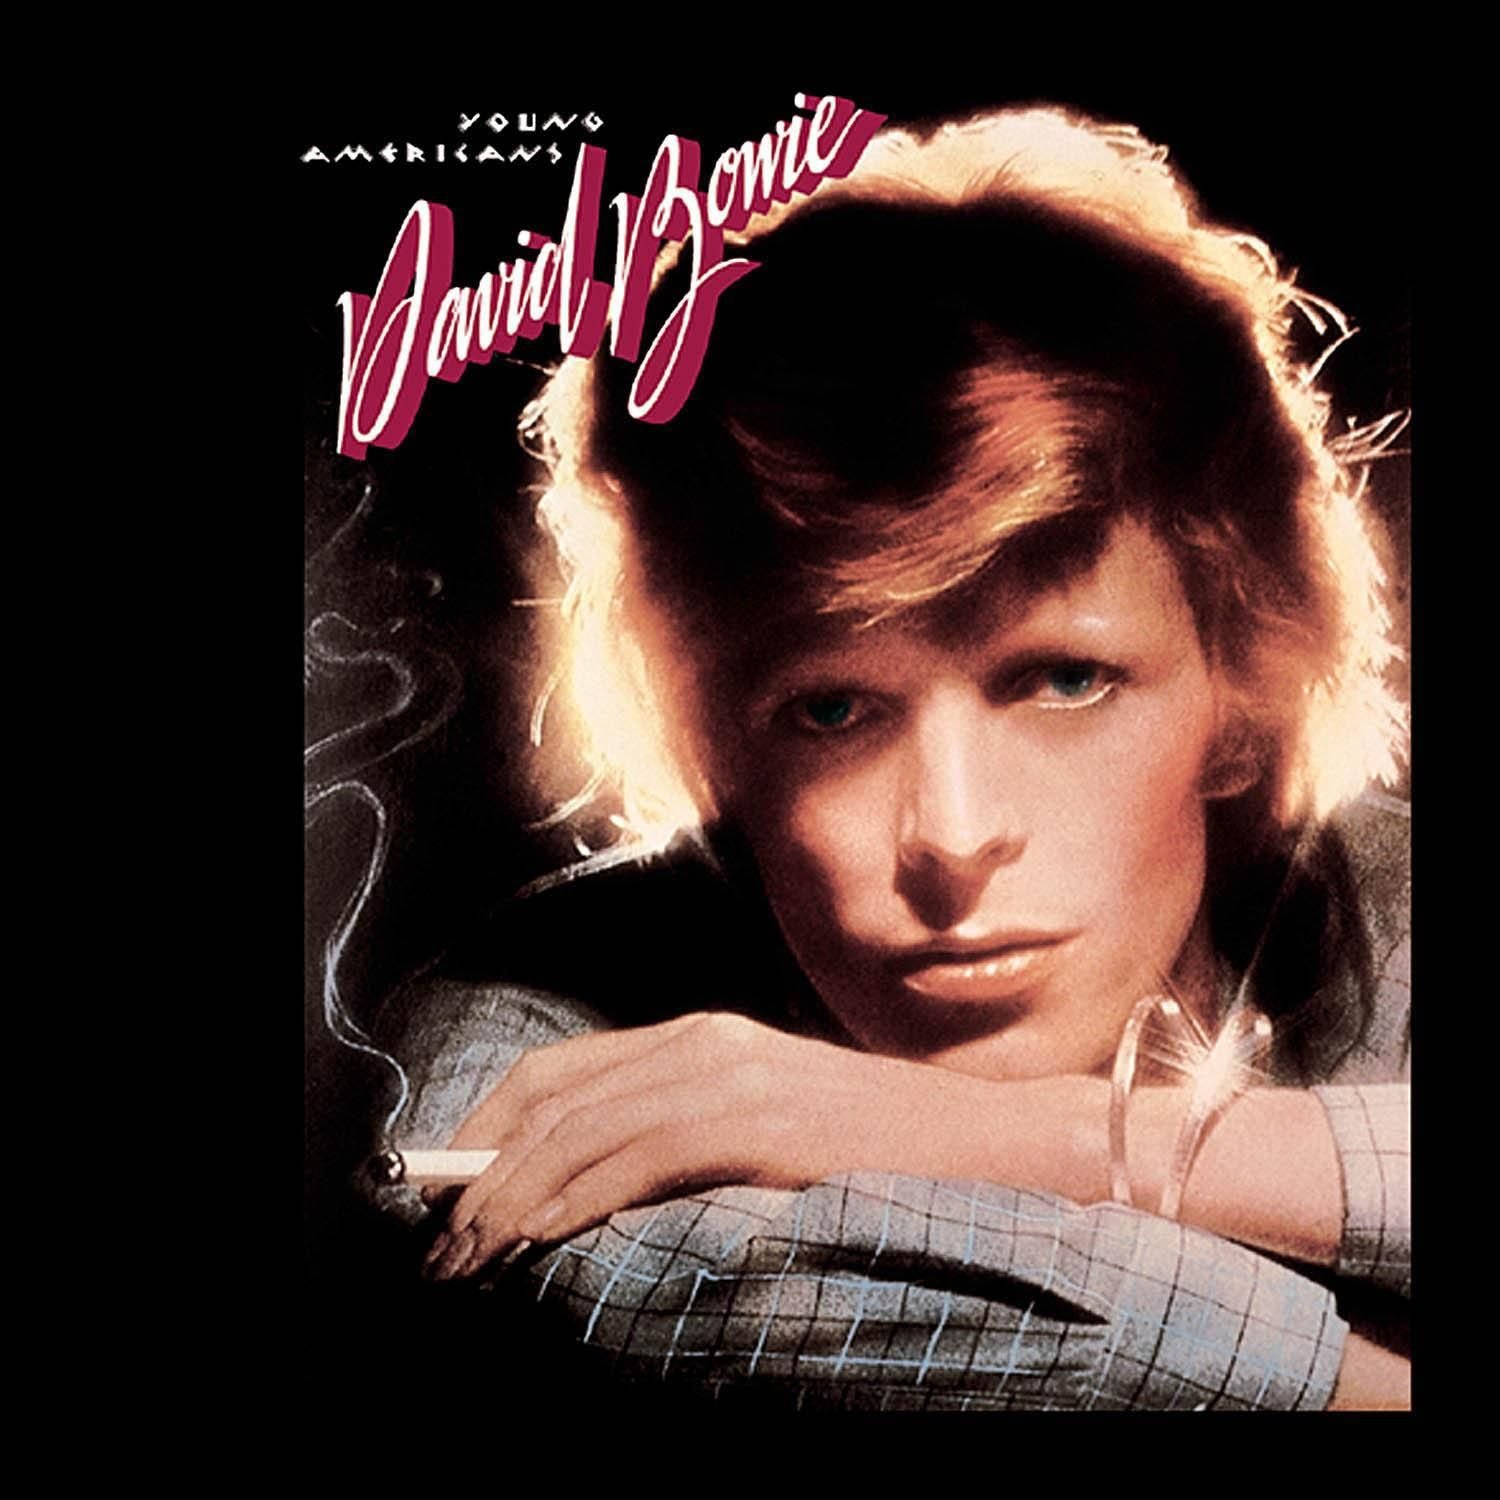 David Bowie "Young Americans" LP